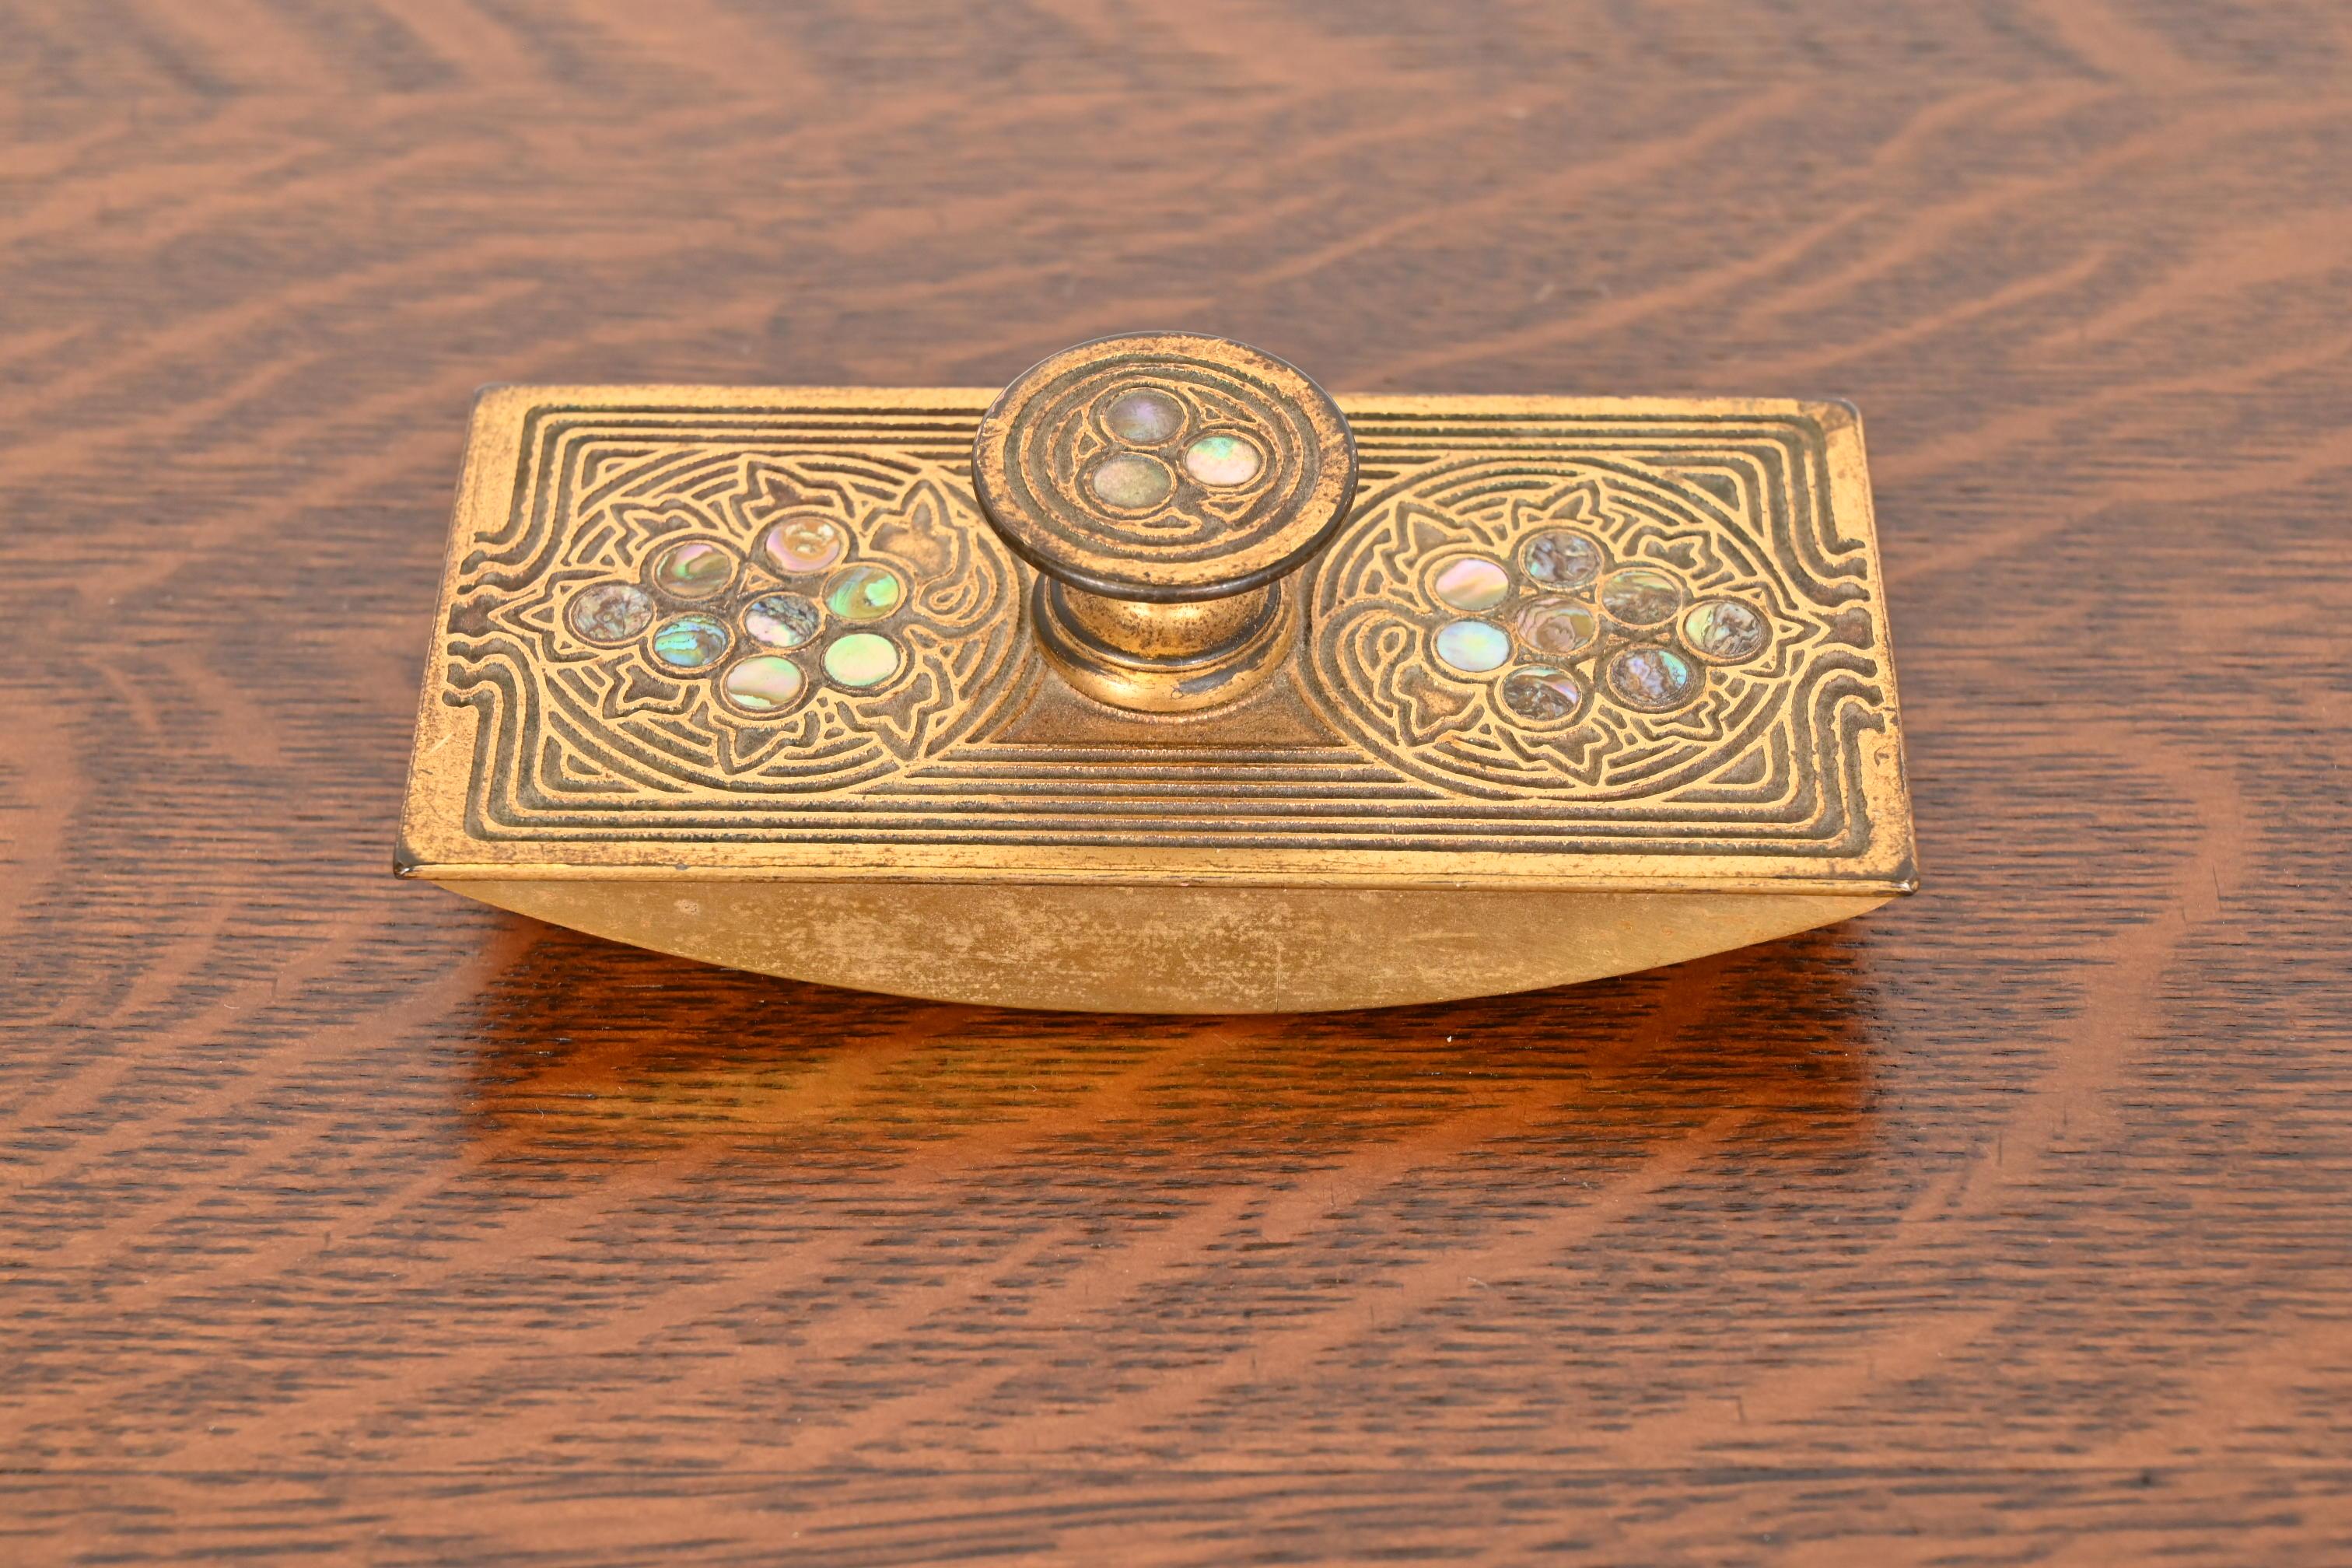 A gorgeous Art Nouveau or Art Deco period gilt bronze and inlaid abalone rocker ink blotter

By Tiffany Studios

New York, USA, Early 20th Century

Measures: 5.75